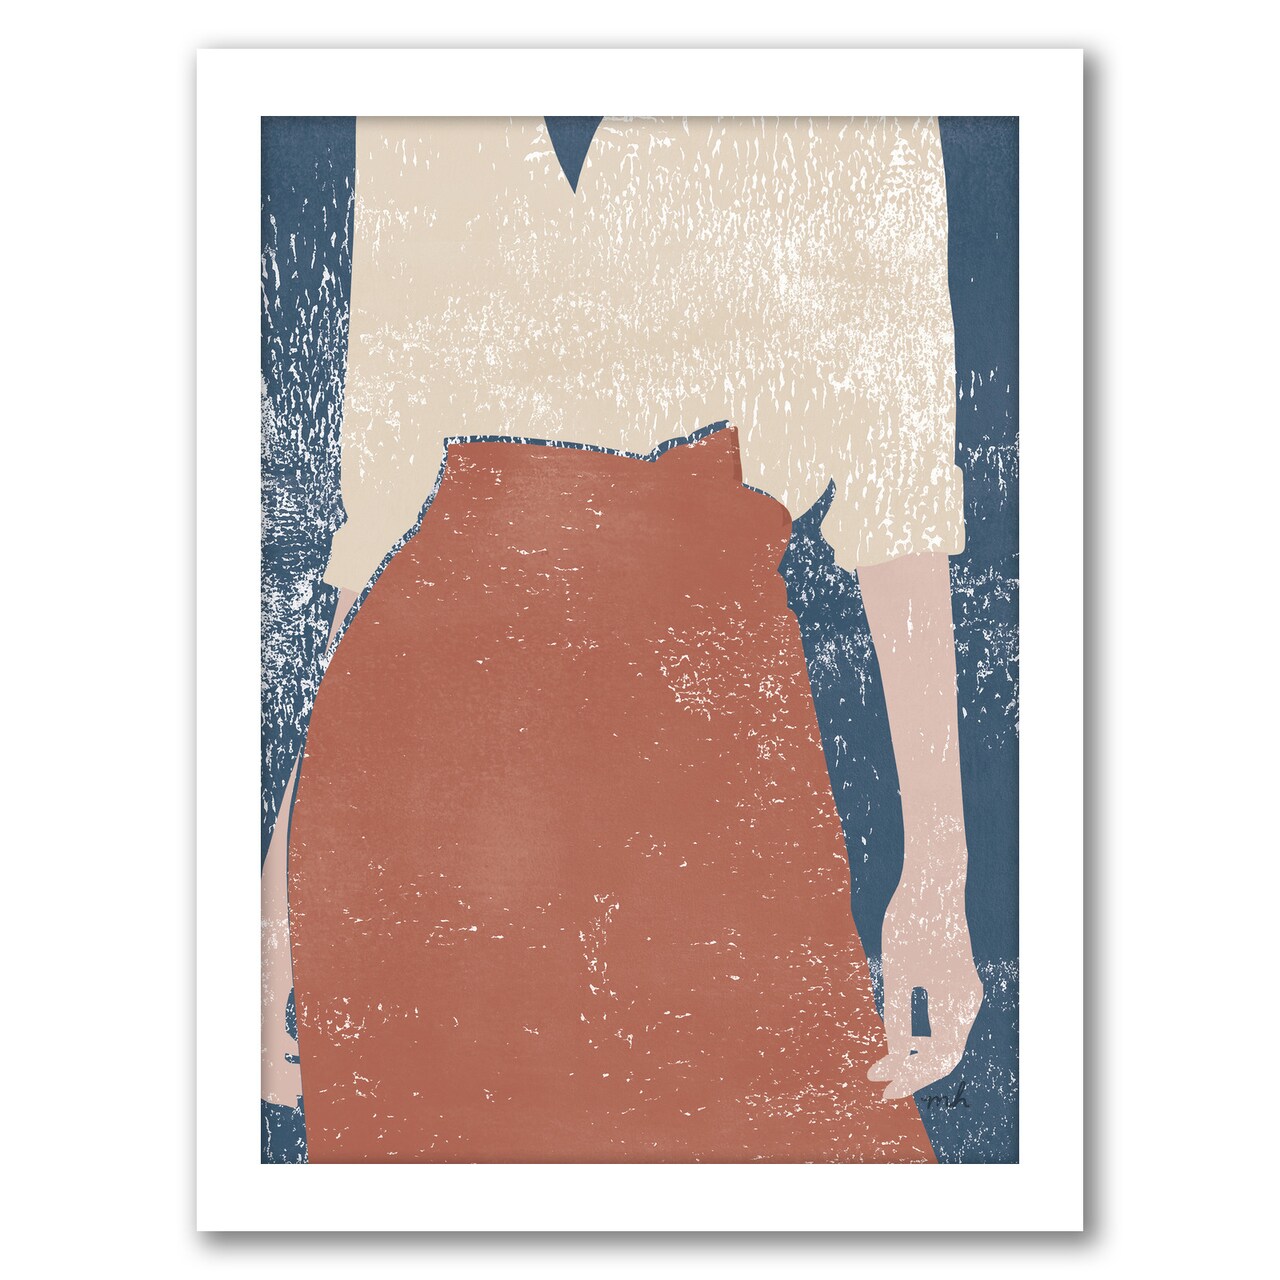 Casual Iv by Moira Hershey Black Framed Print 8x10 - Americanflat